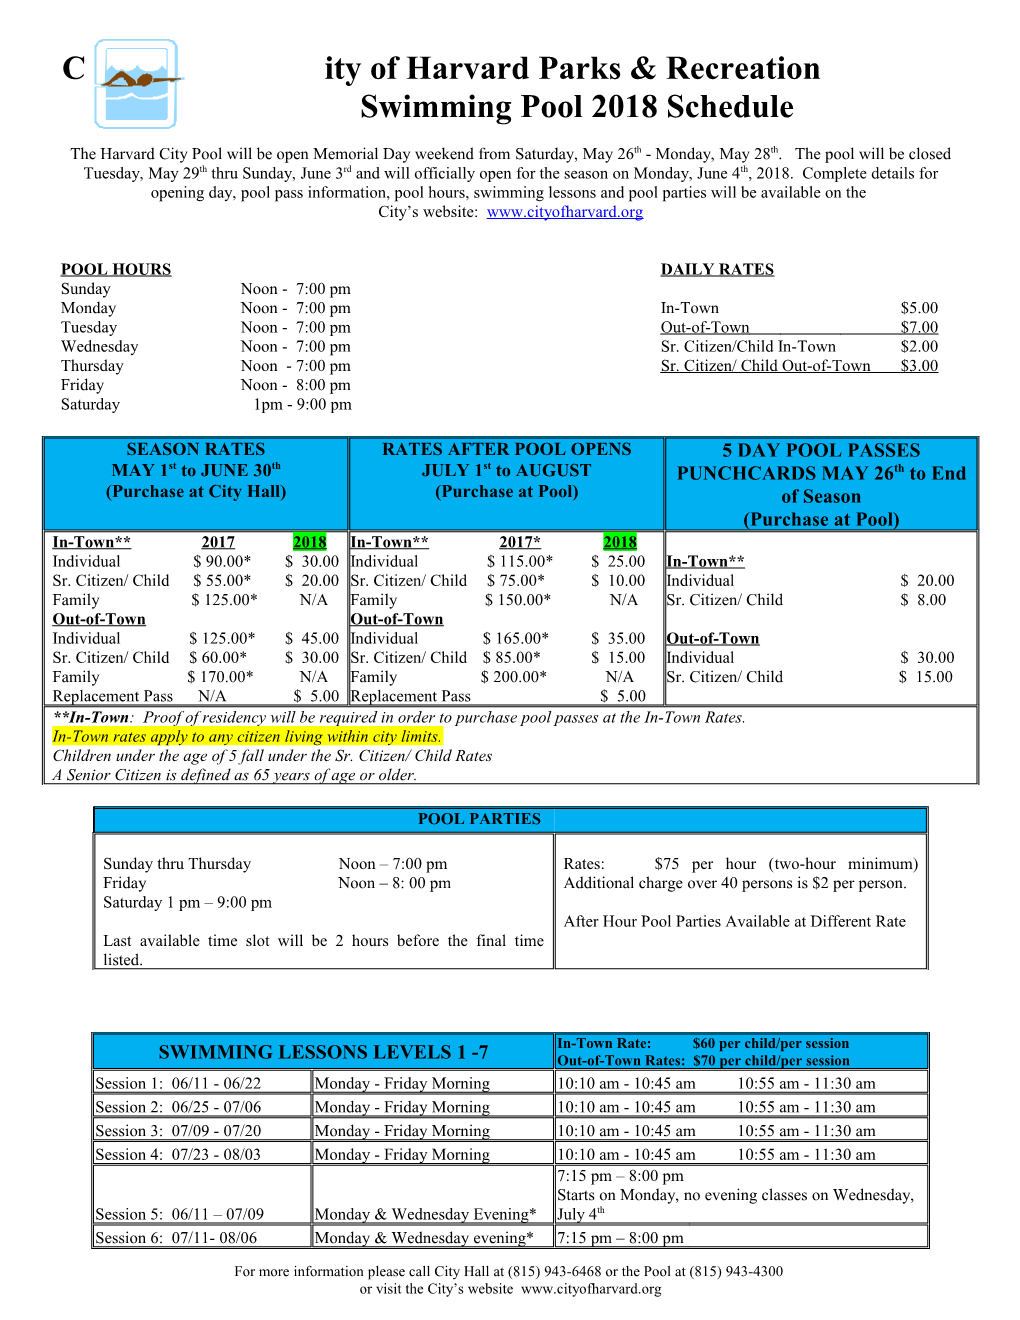 City of Harvard Parks & Recreation Swimming Pool 2018 Schedule